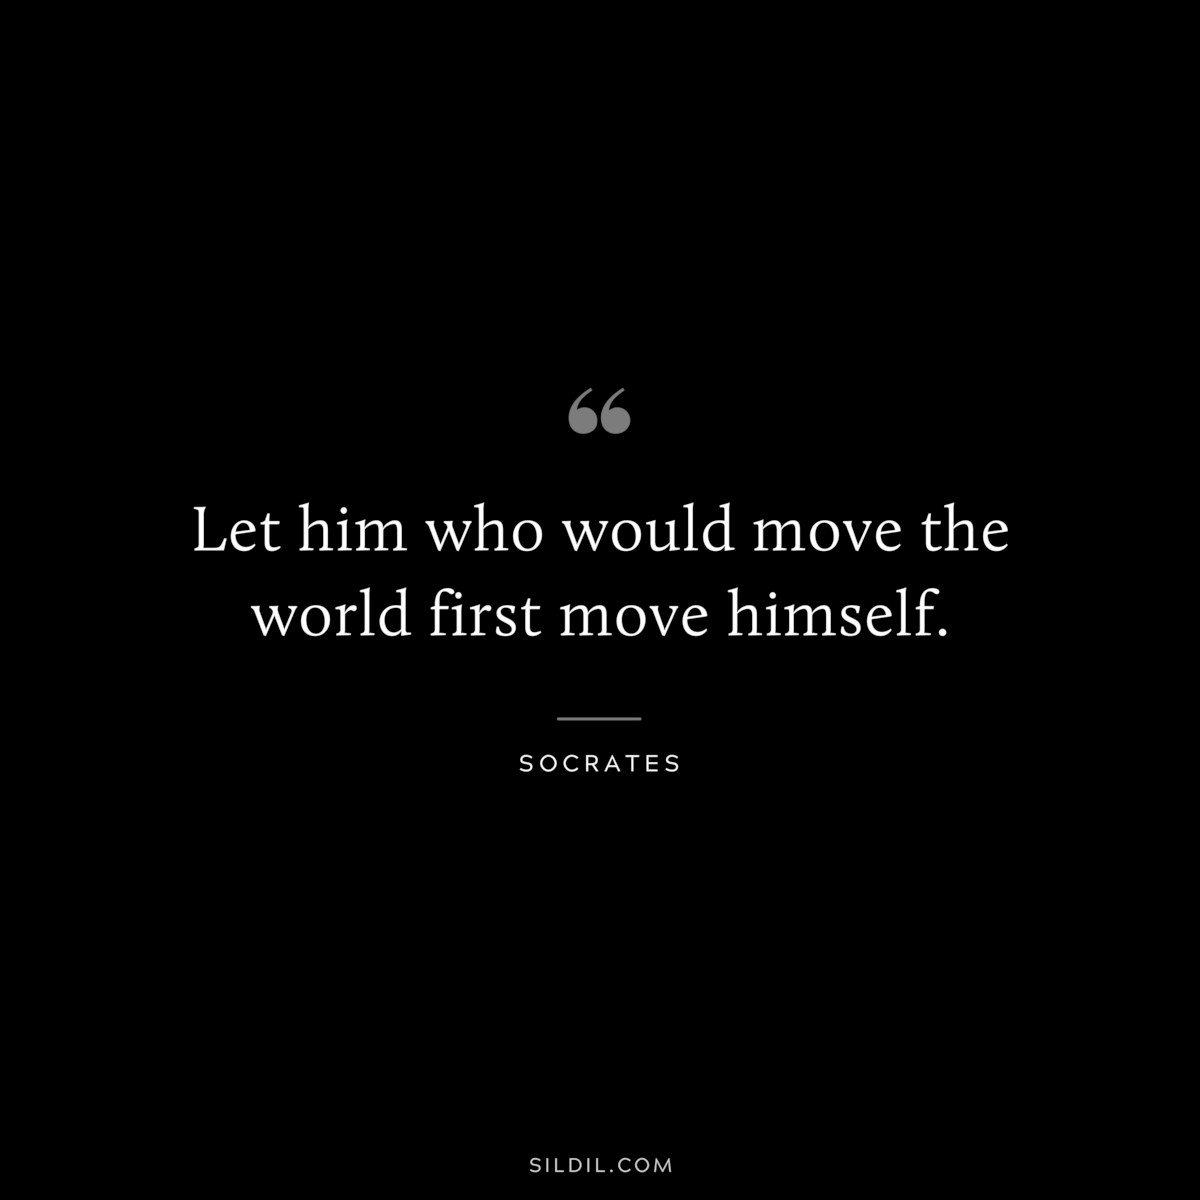 Let him who would move the world first move himself. ― Socrates